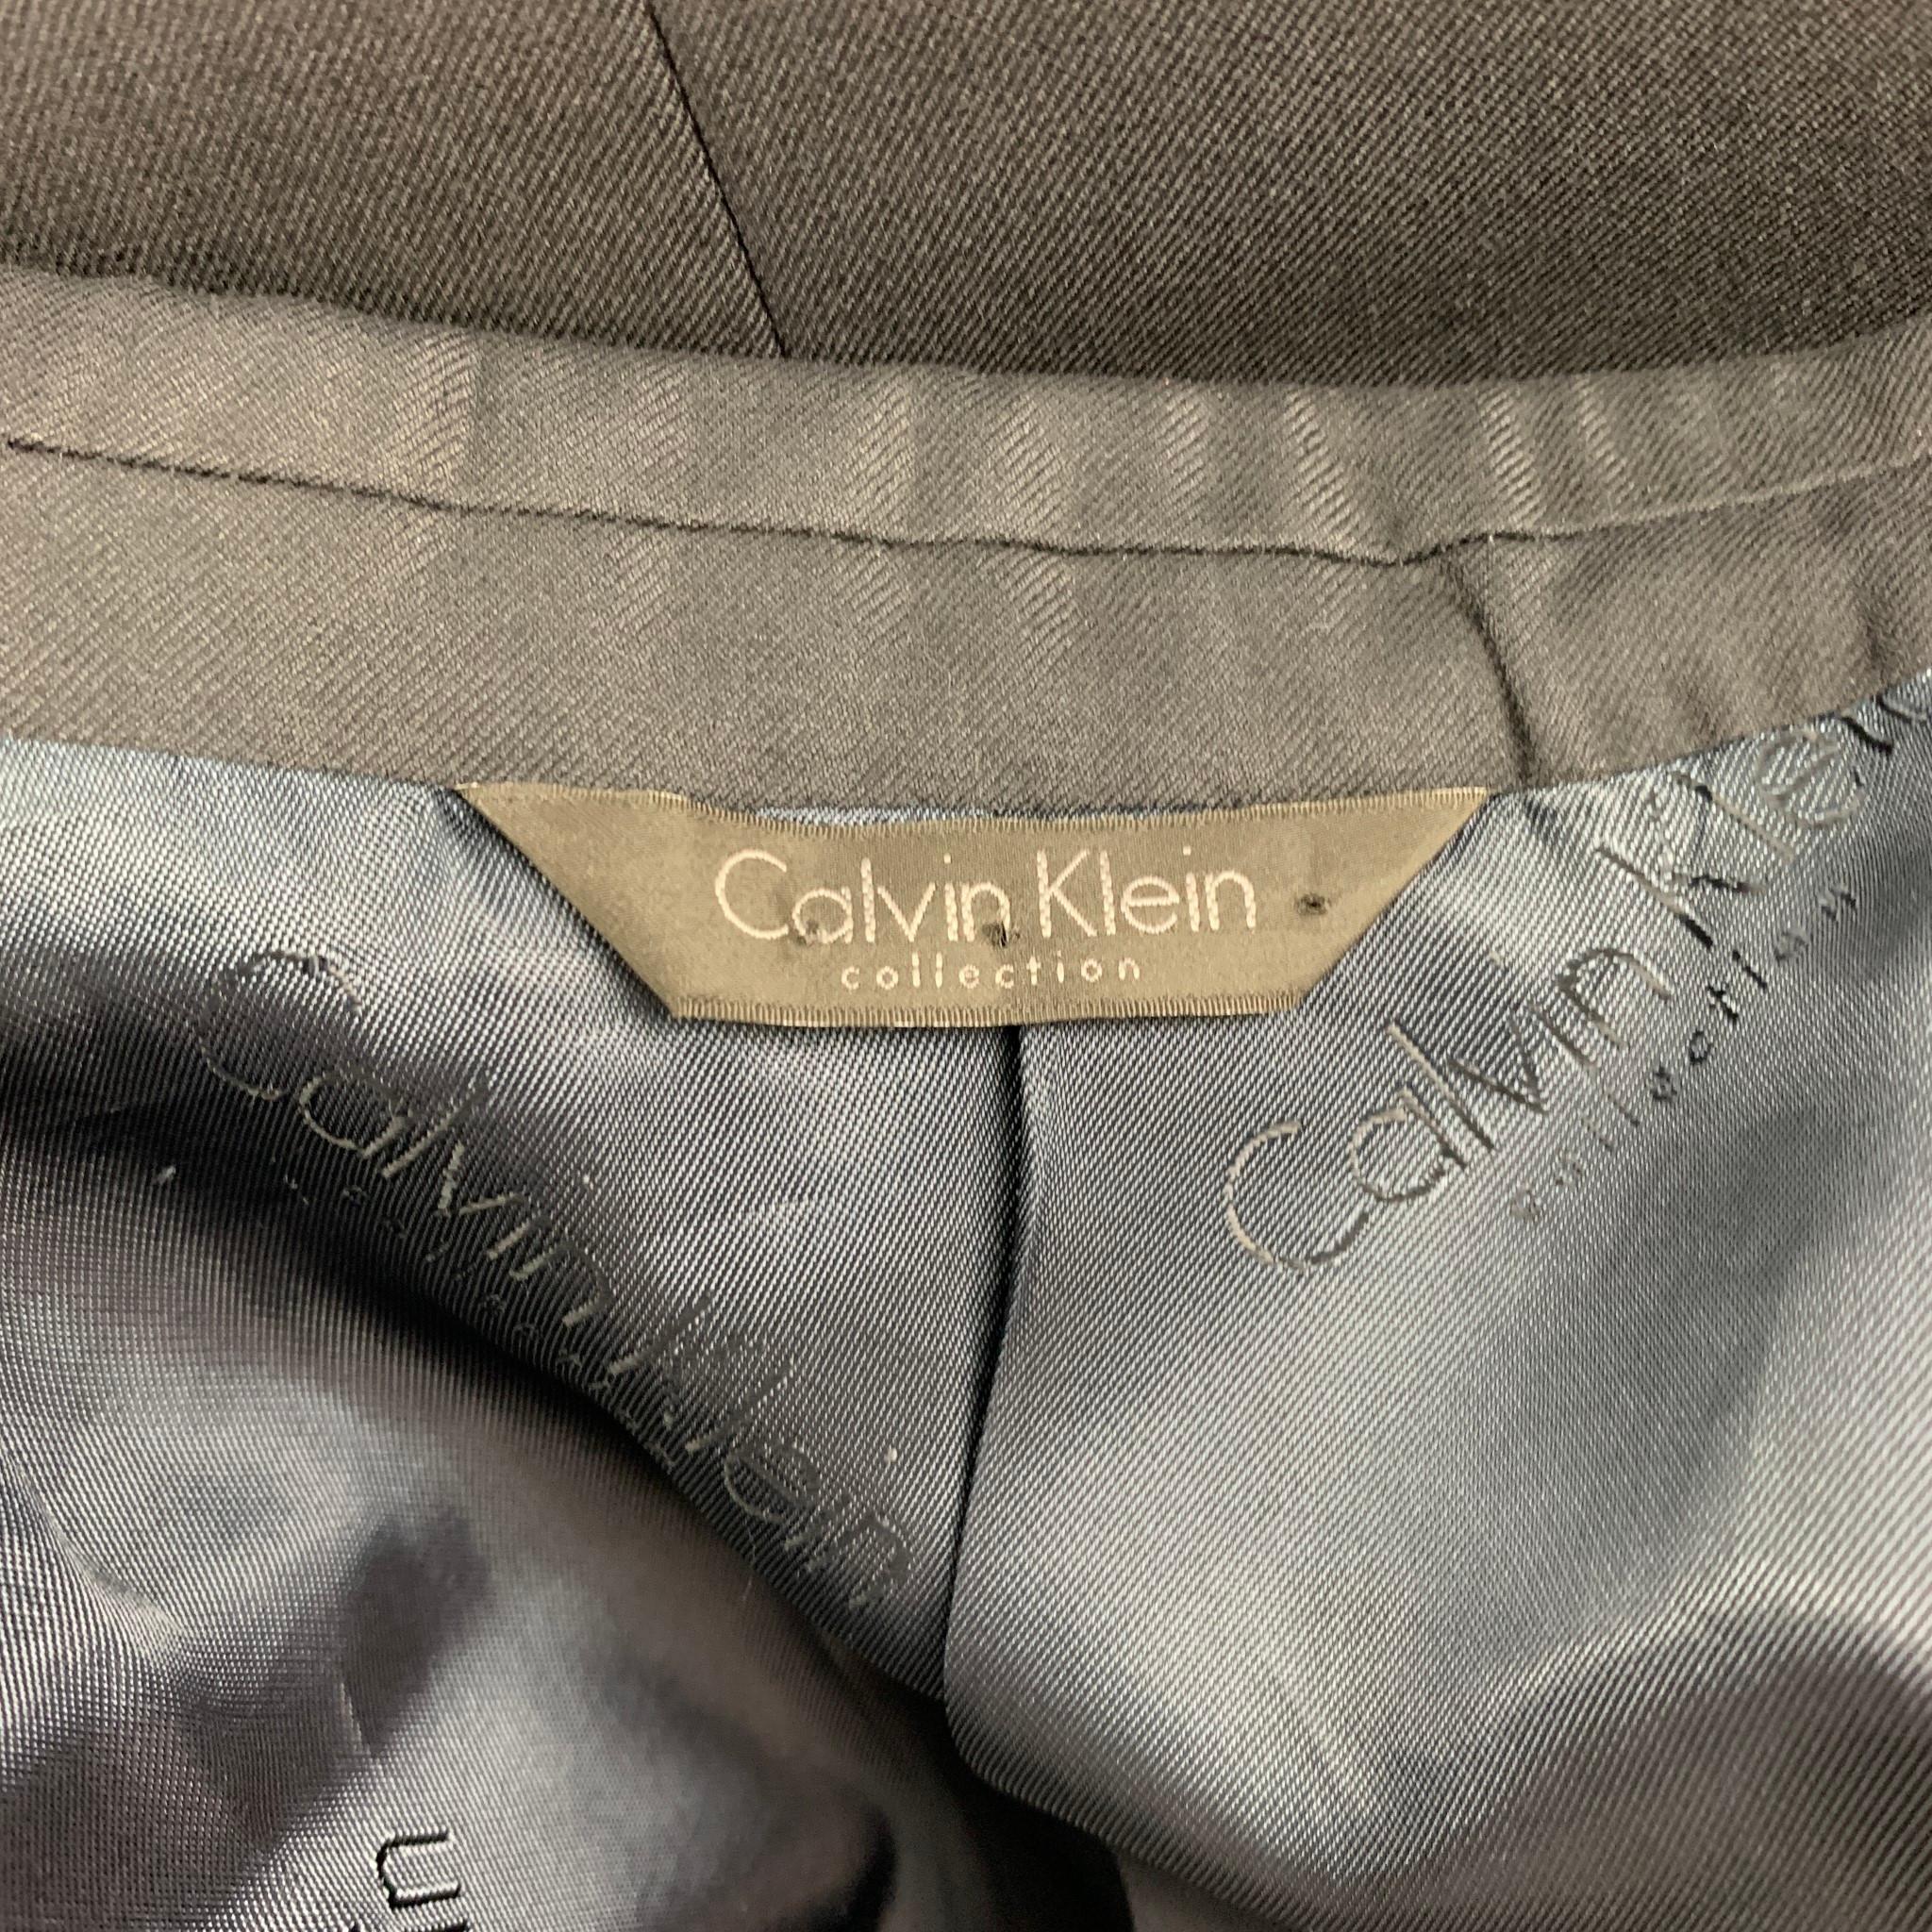 CALVIN KLEIN COLLECTION sport coat comes in a navy wool with a full liner featuring a peak lapel, flap pockets, and a double button closure.

Very Good Pre-Owned Condition.
Marked: 40/50

Measurements:

Shoulder: 18 in.
Chest: 40 in.
Sleeve: 26